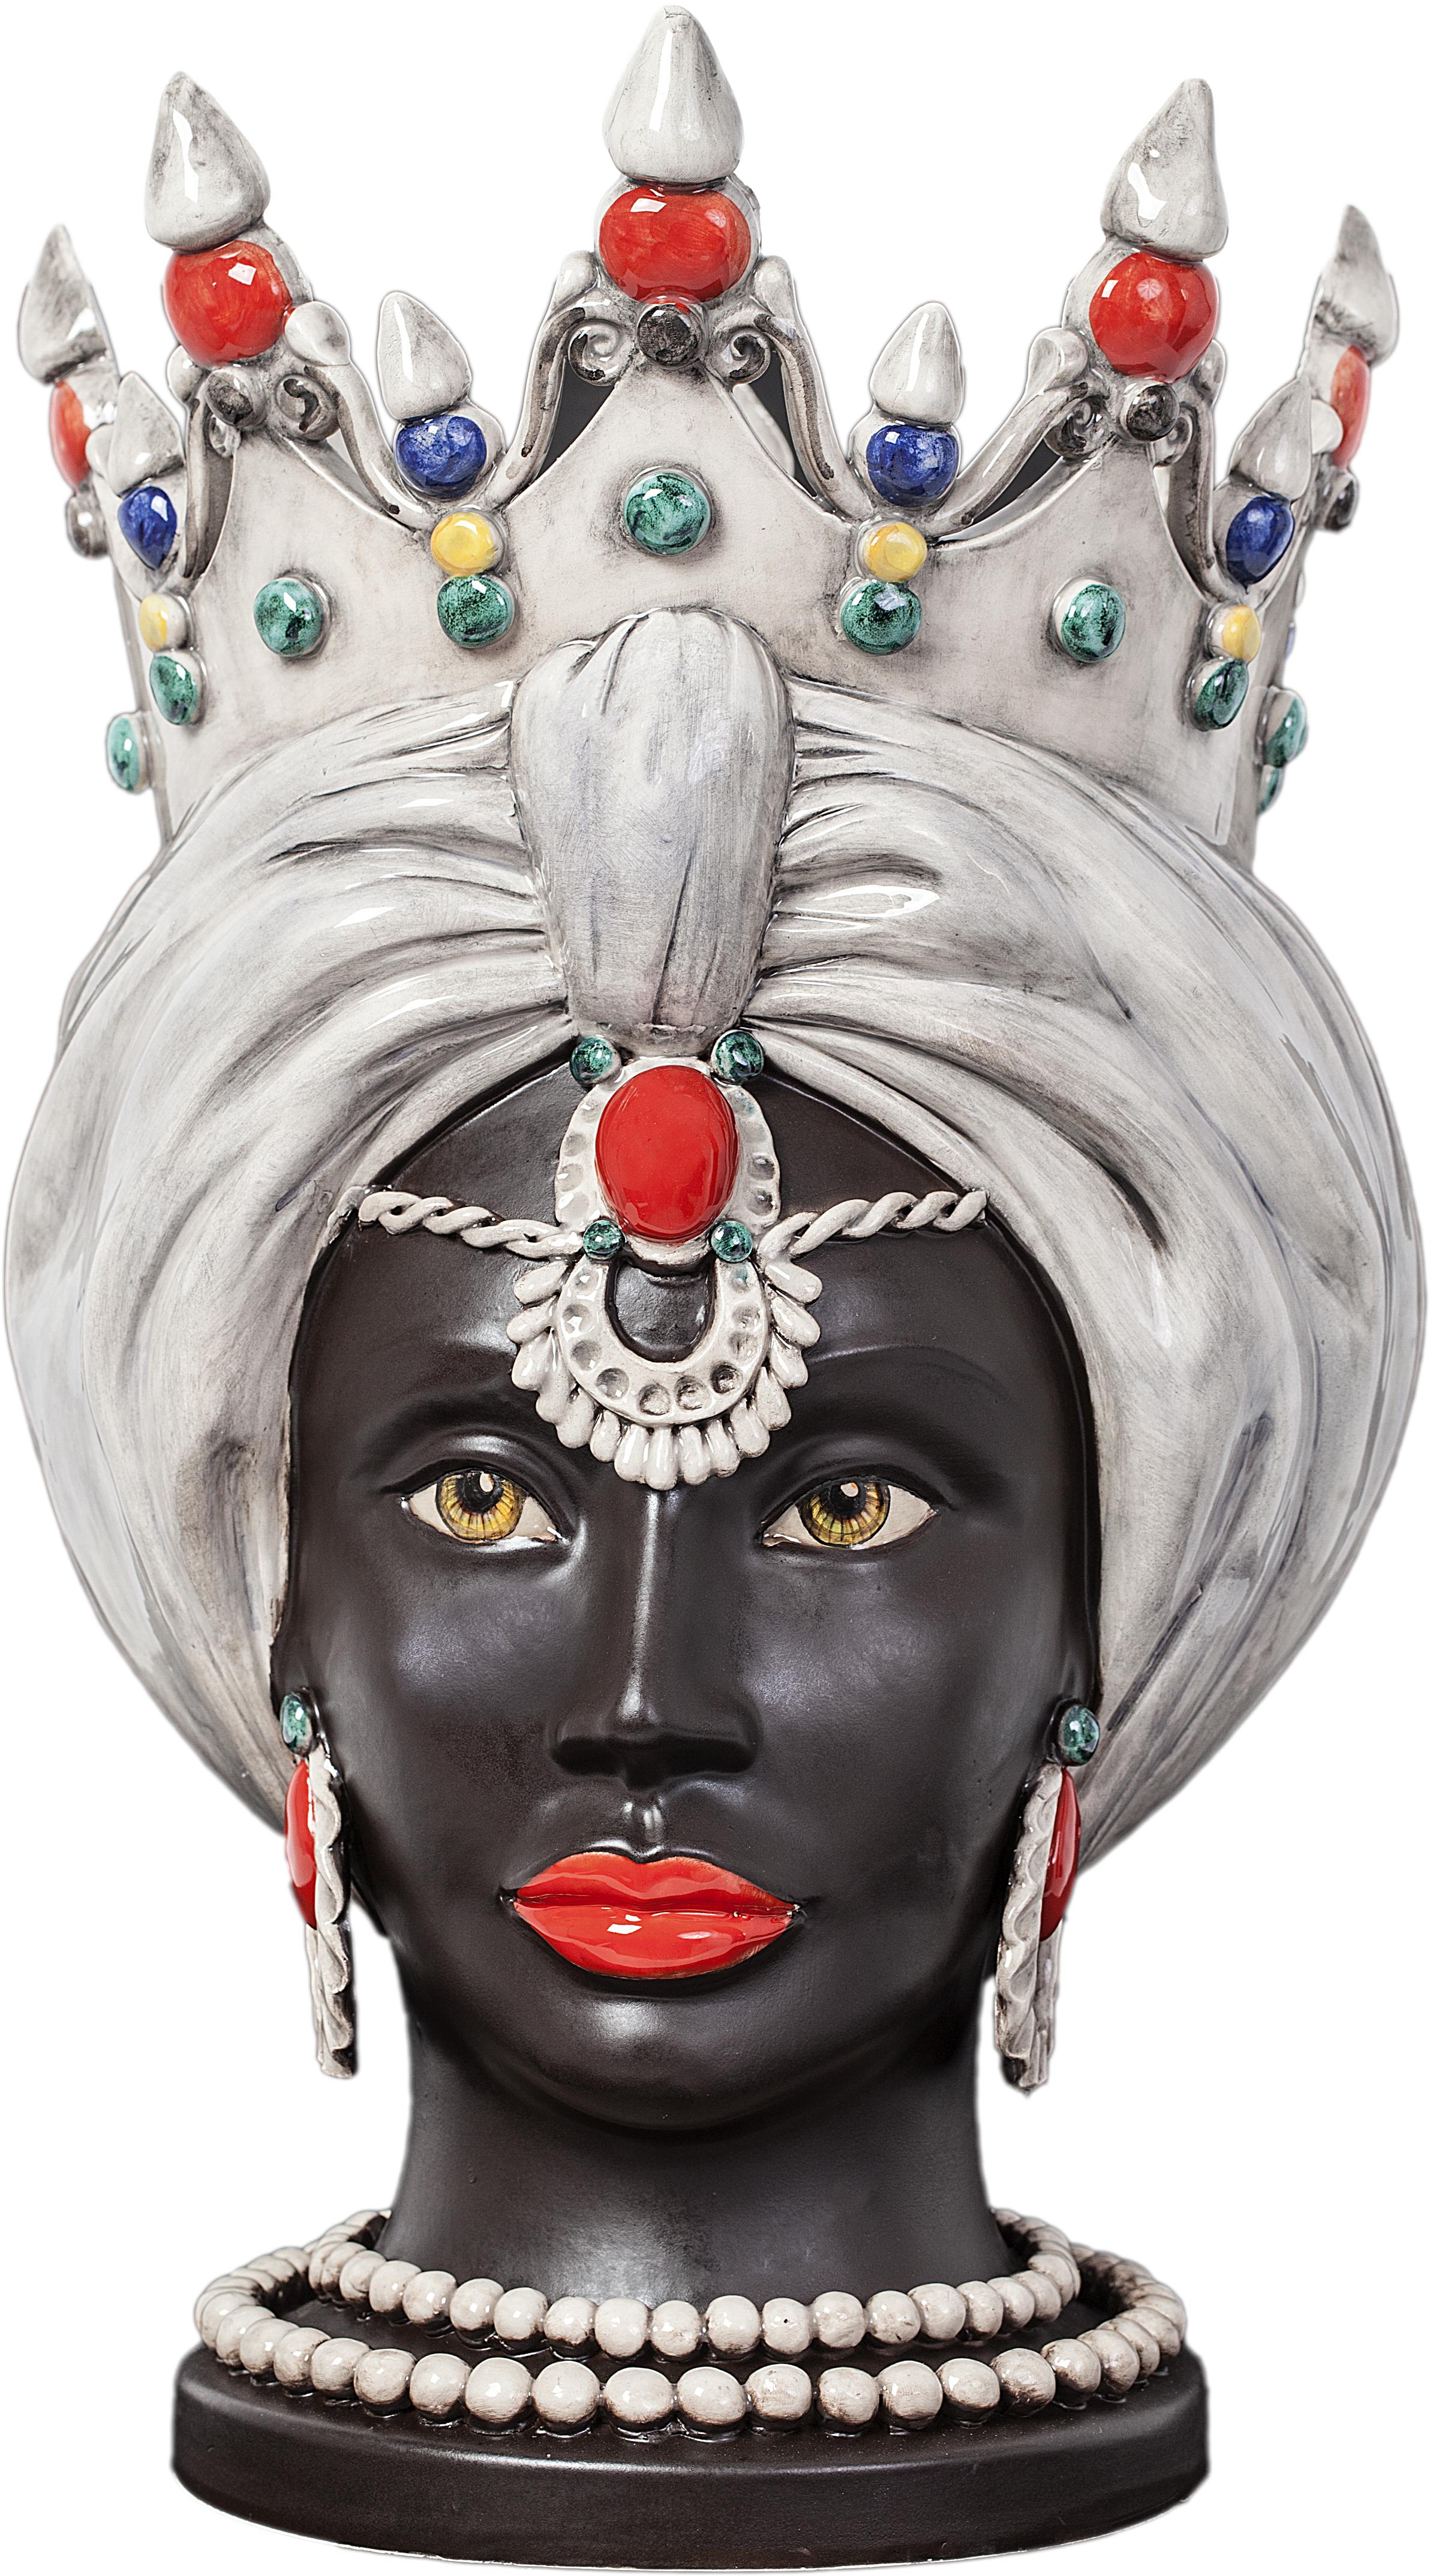 Hand-Crafted Venere V15, Man's Moorish Head, Handmade in Sicily, 2021, Hand Painted, Size M For Sale